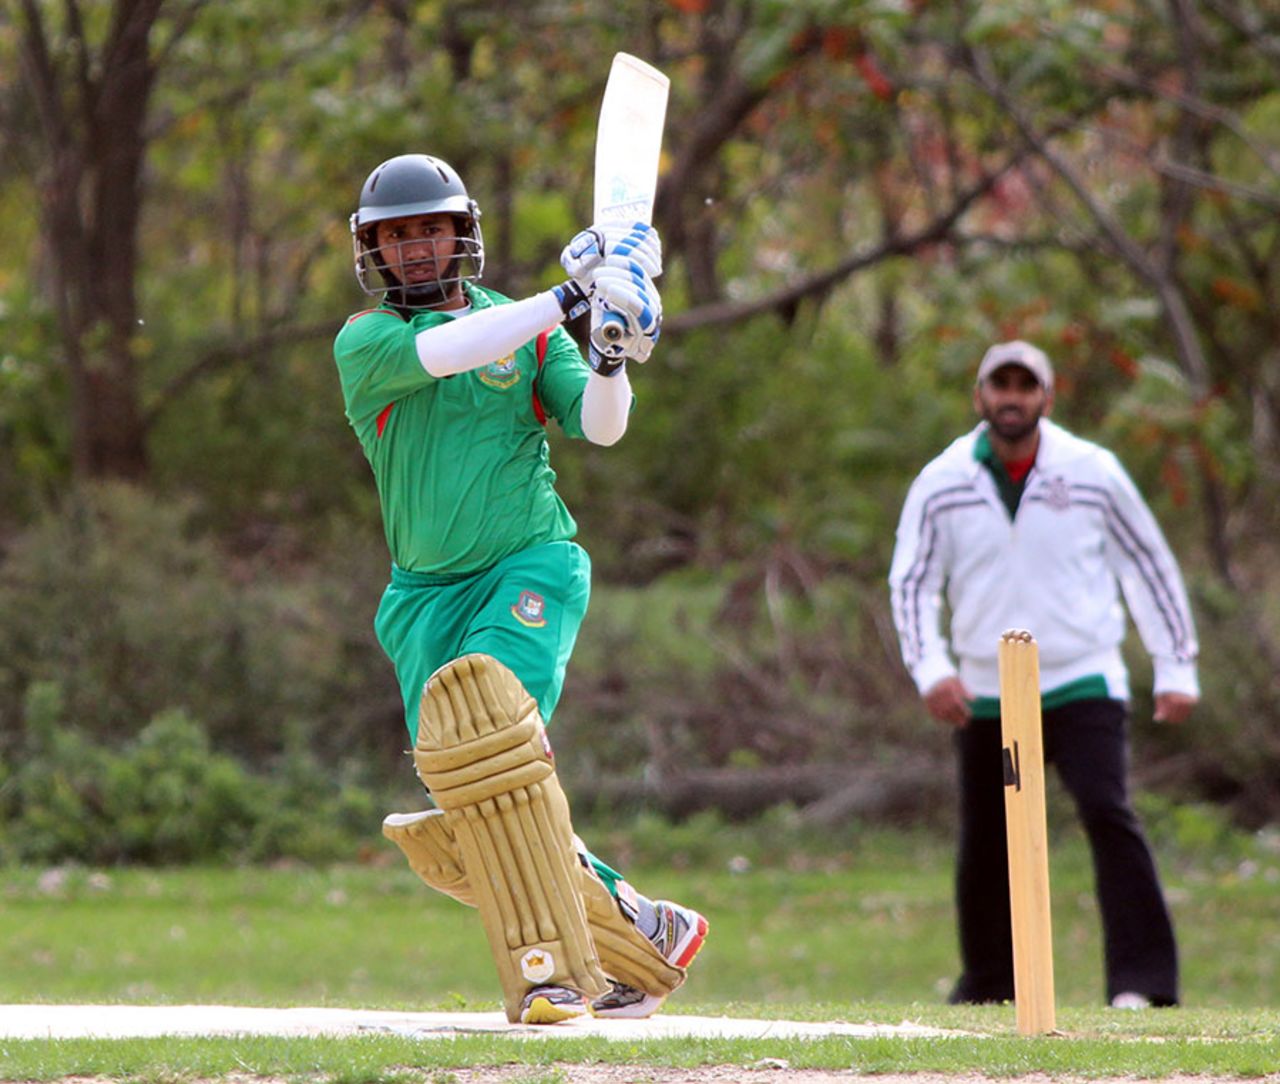 Mohammad Ashraful playing in an unaffiliated cricket tournament in New York, New York, October 23, 2014